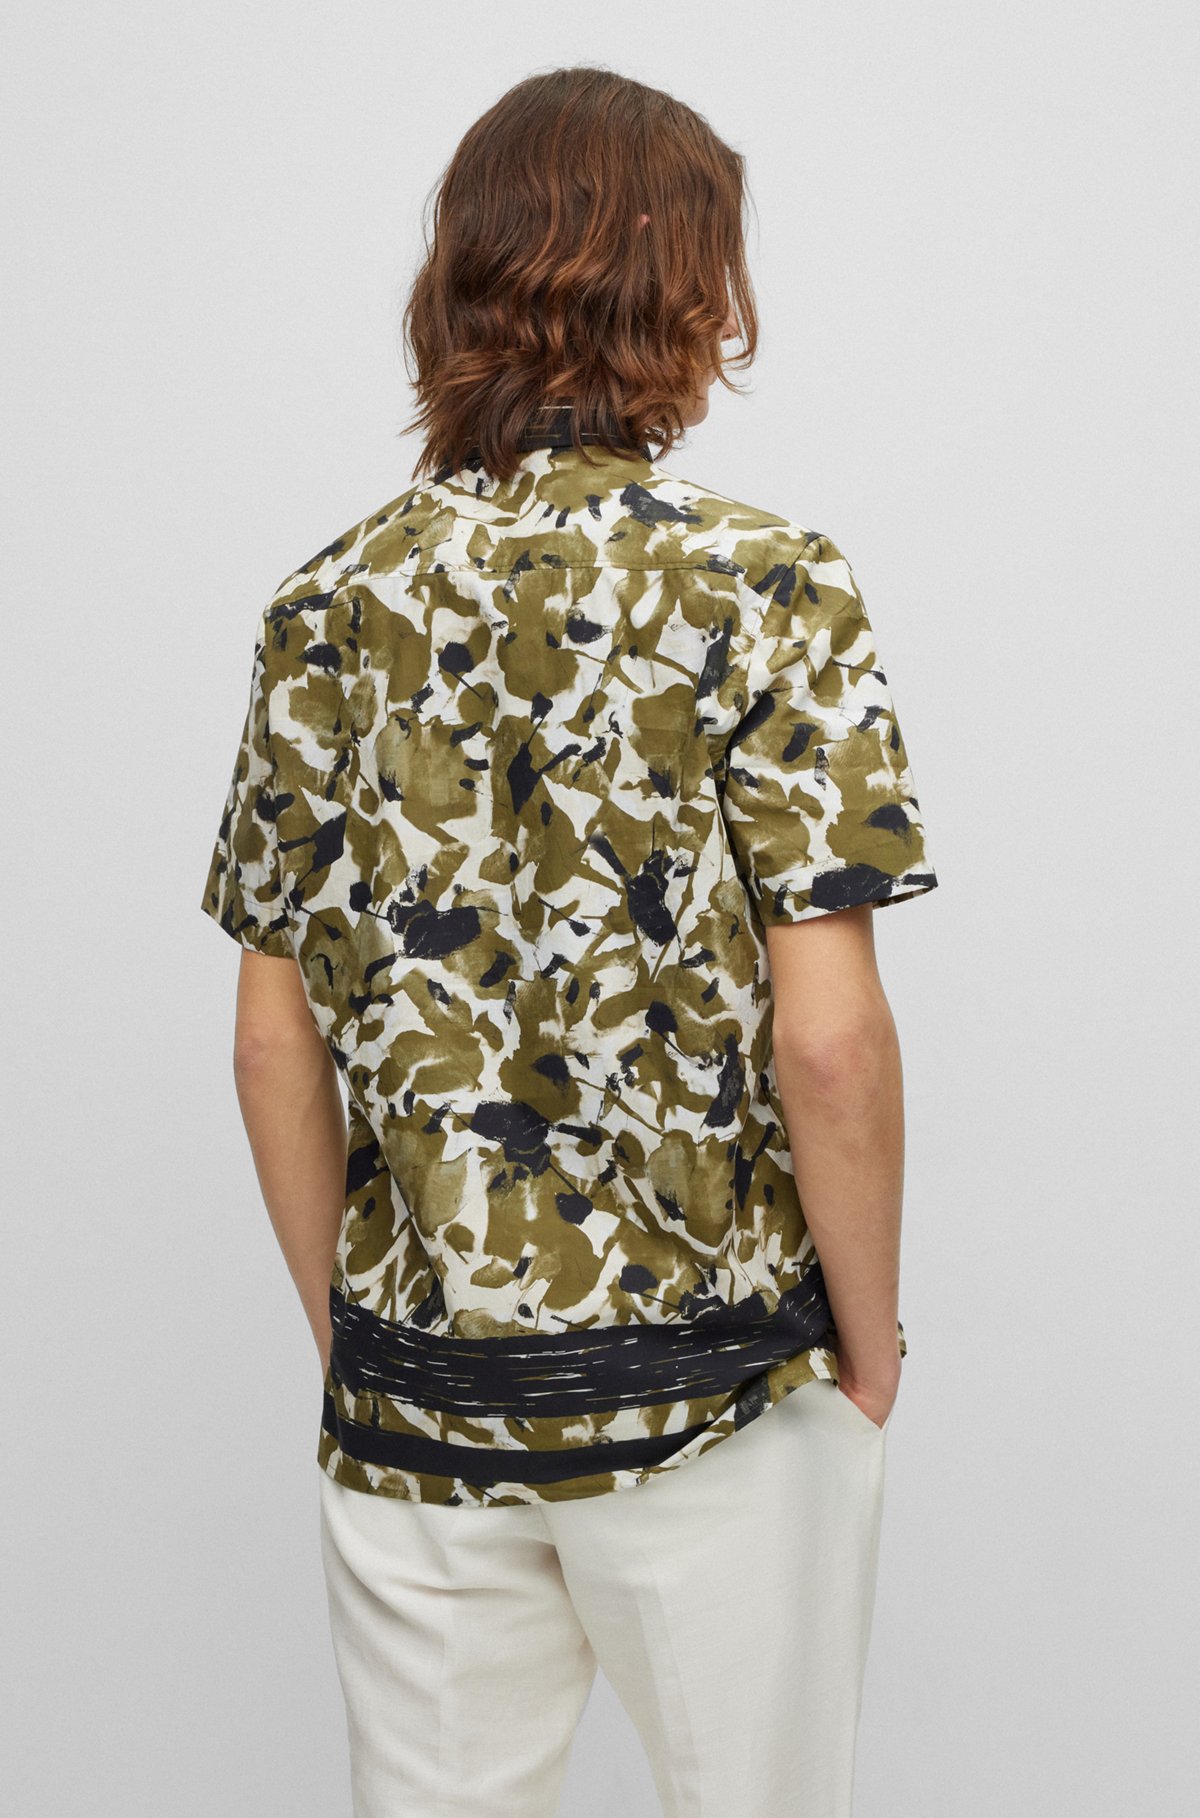 HUGO - Relaxed-fit shirt in abstract floral-print cotton poplin